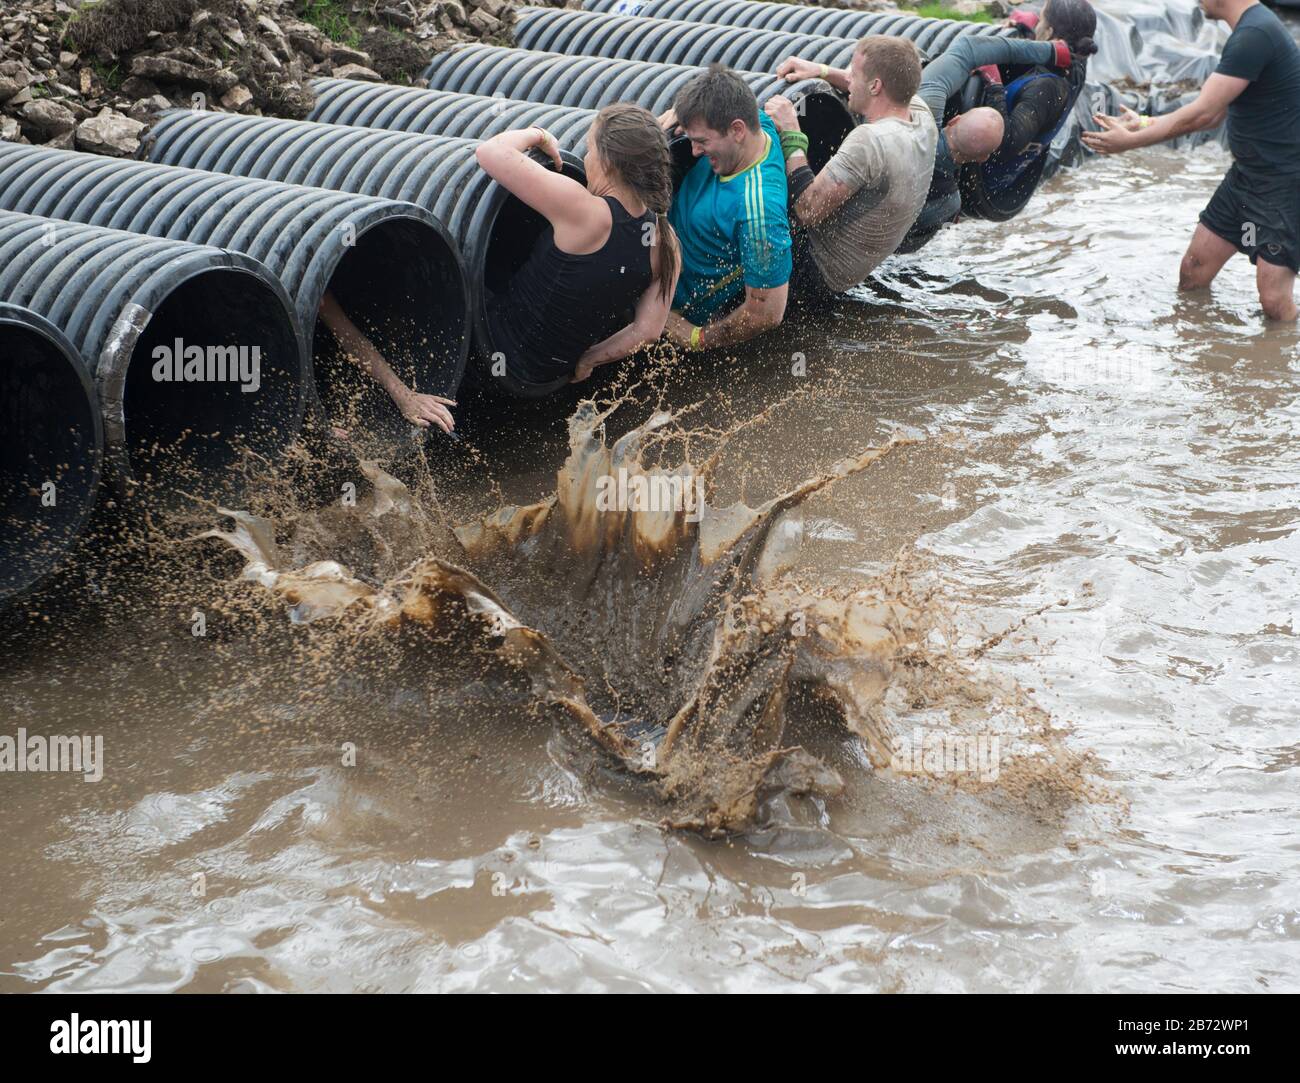 Tough Mudder Obstacle Course: participants tackling the Shawshanked obstacle falling into cold muddy water Stock Photo